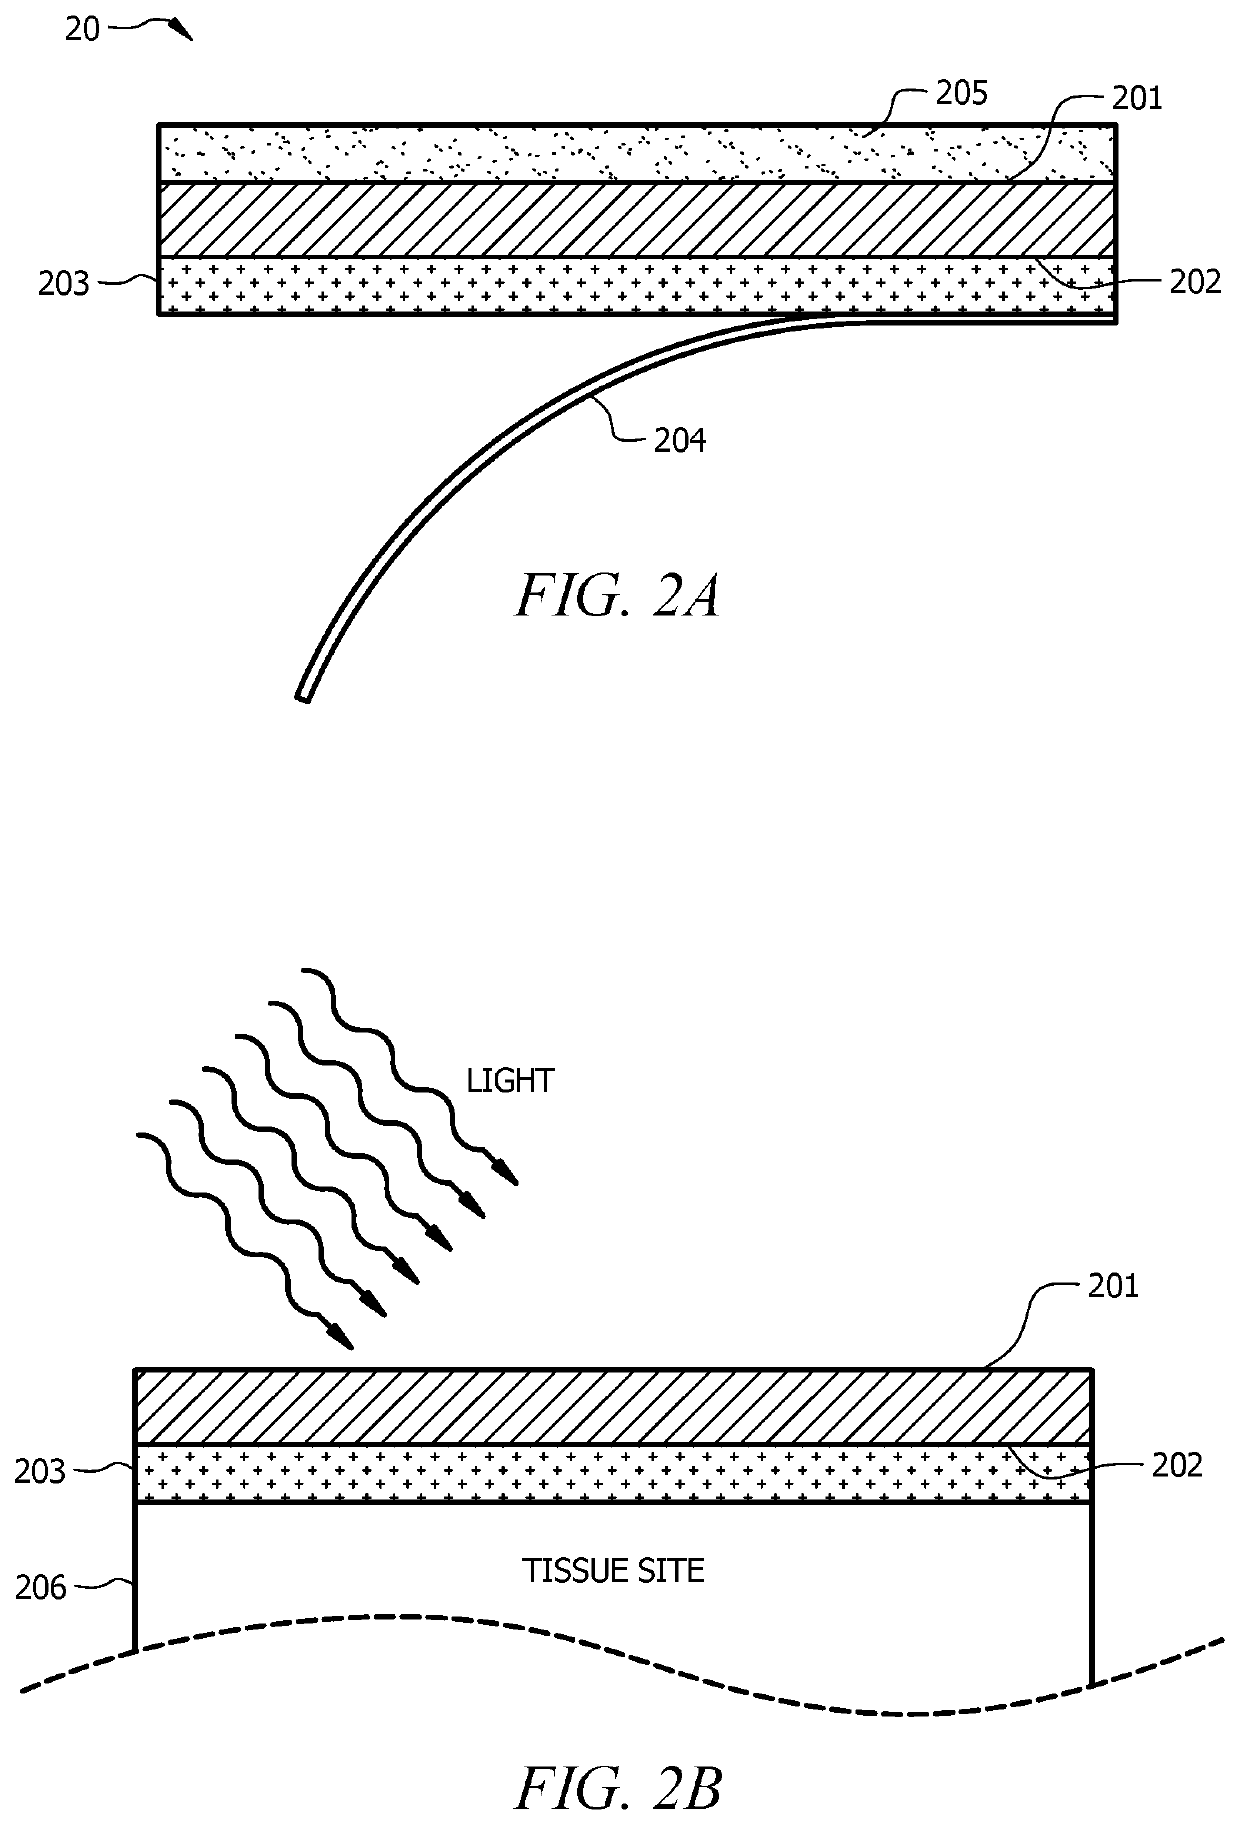 Light-responsive pressure sensitive adhesives for wound dressings